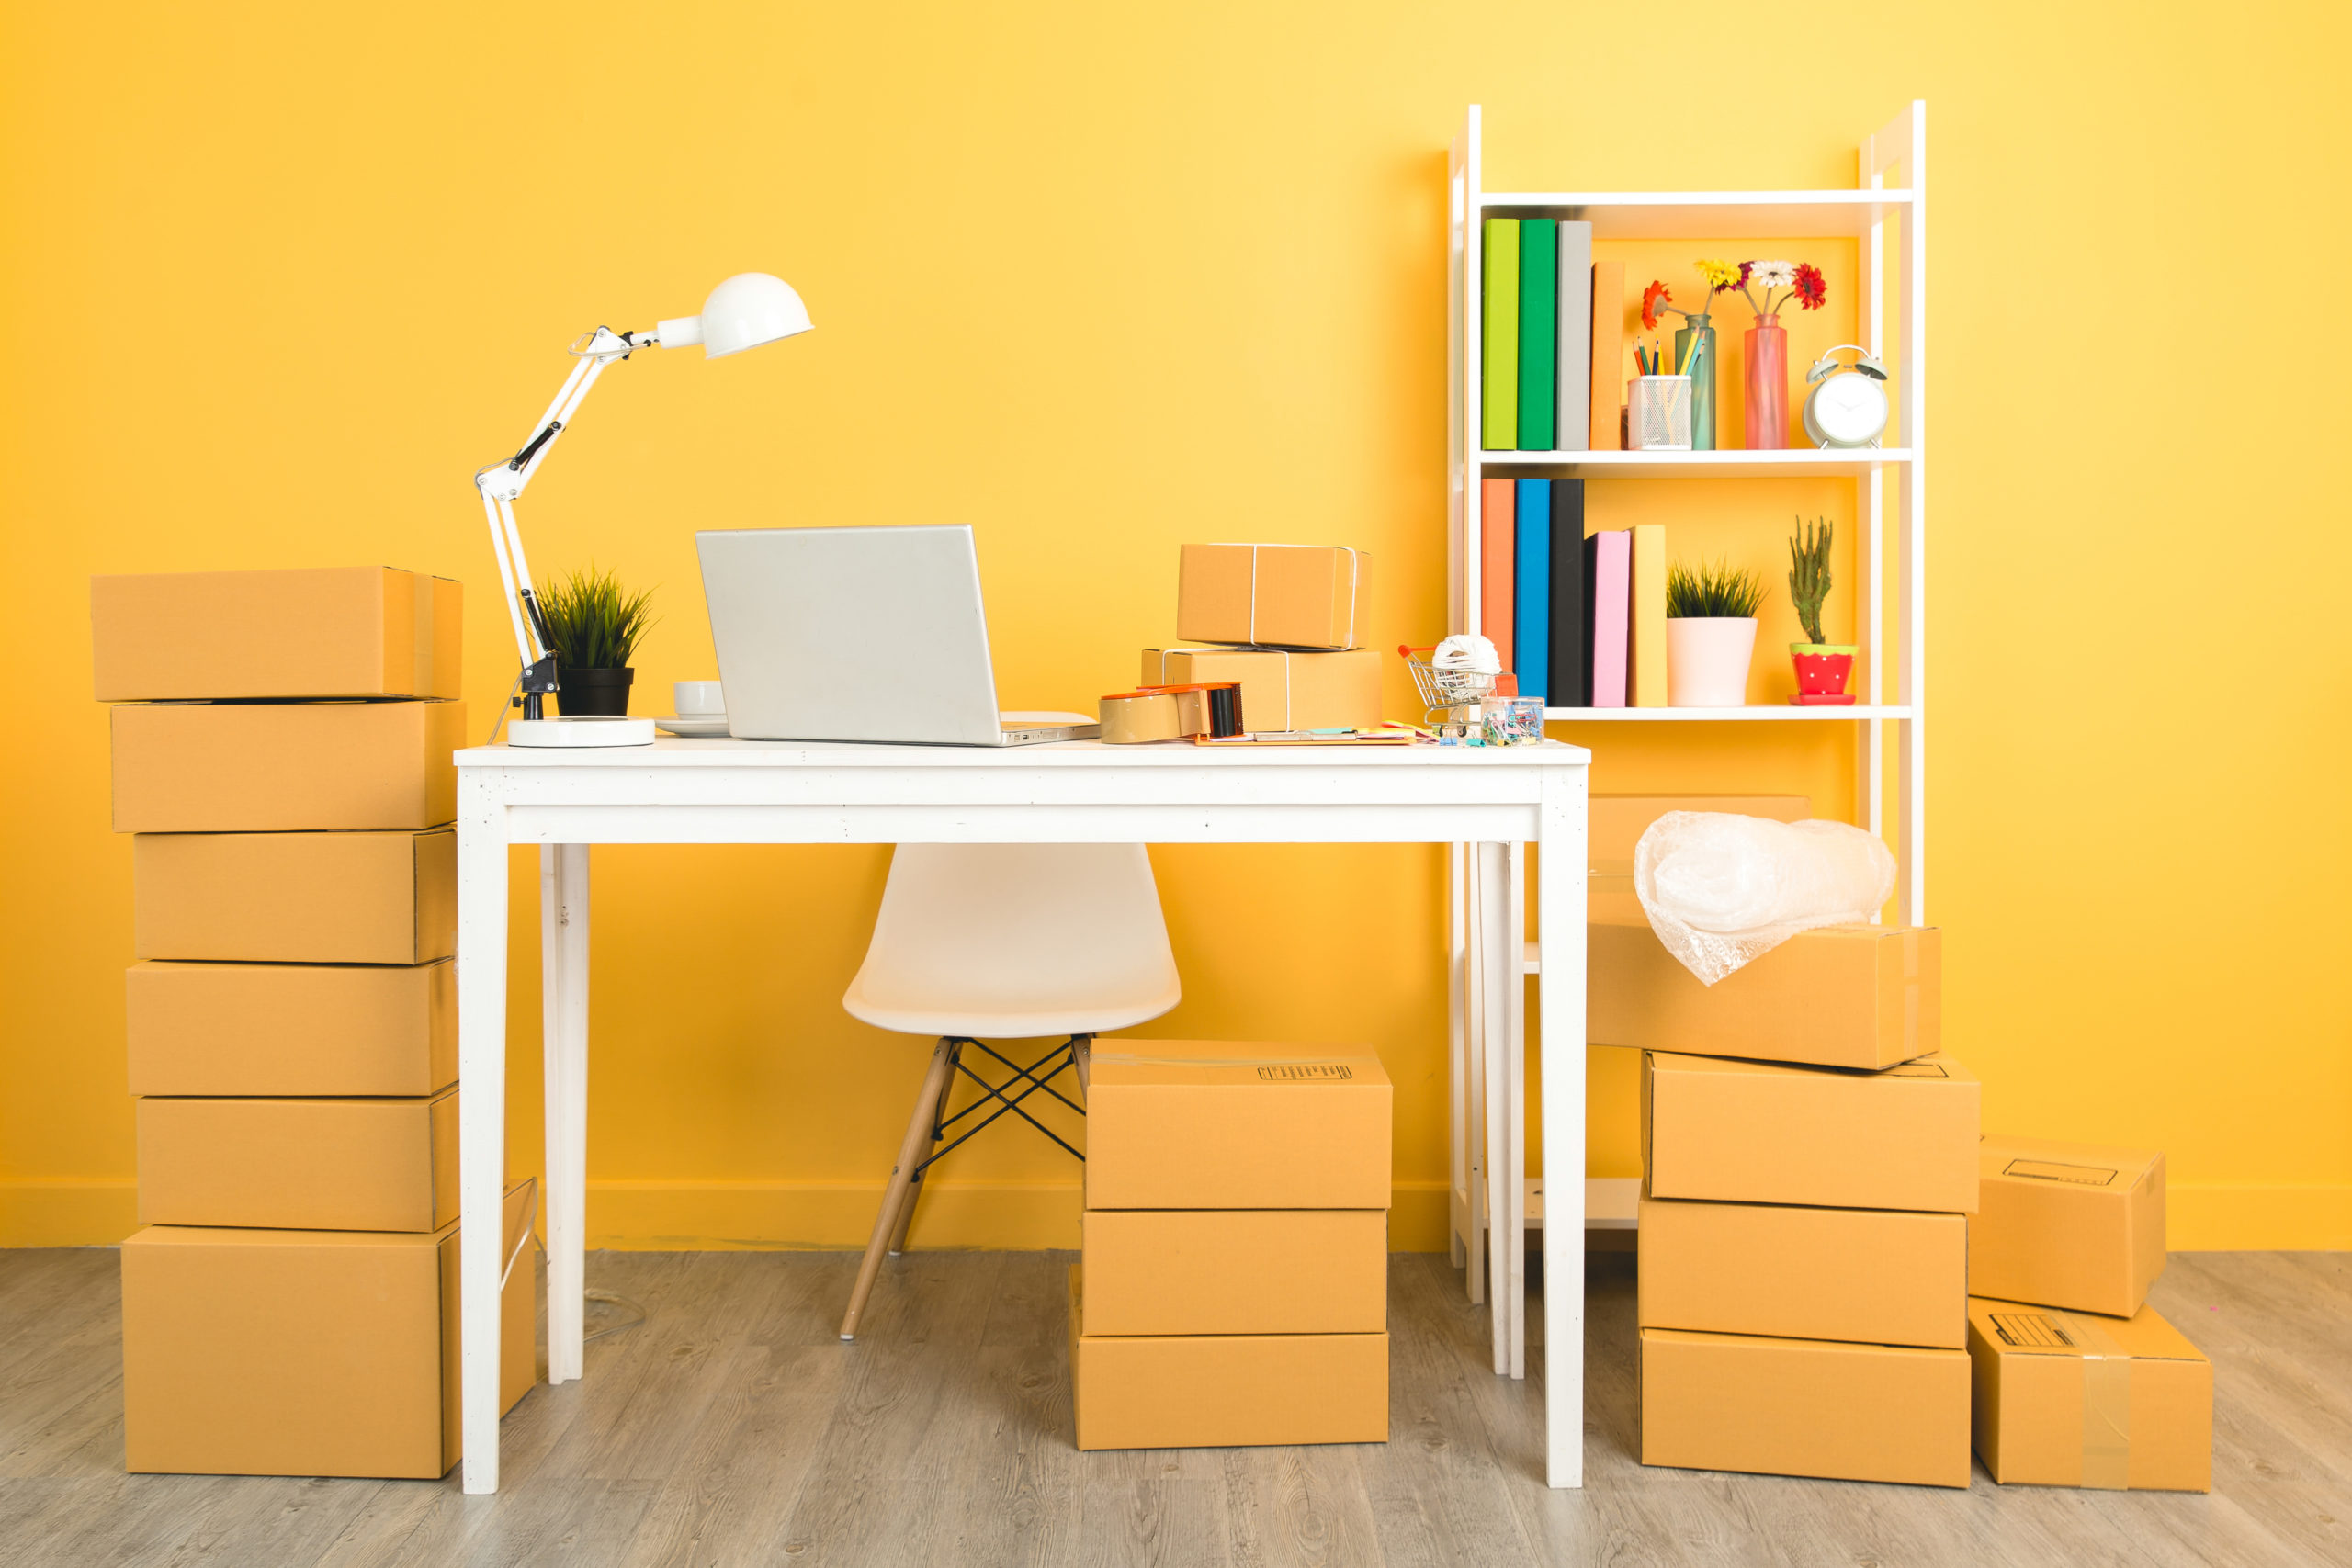 business owner working at home office packaging on background.